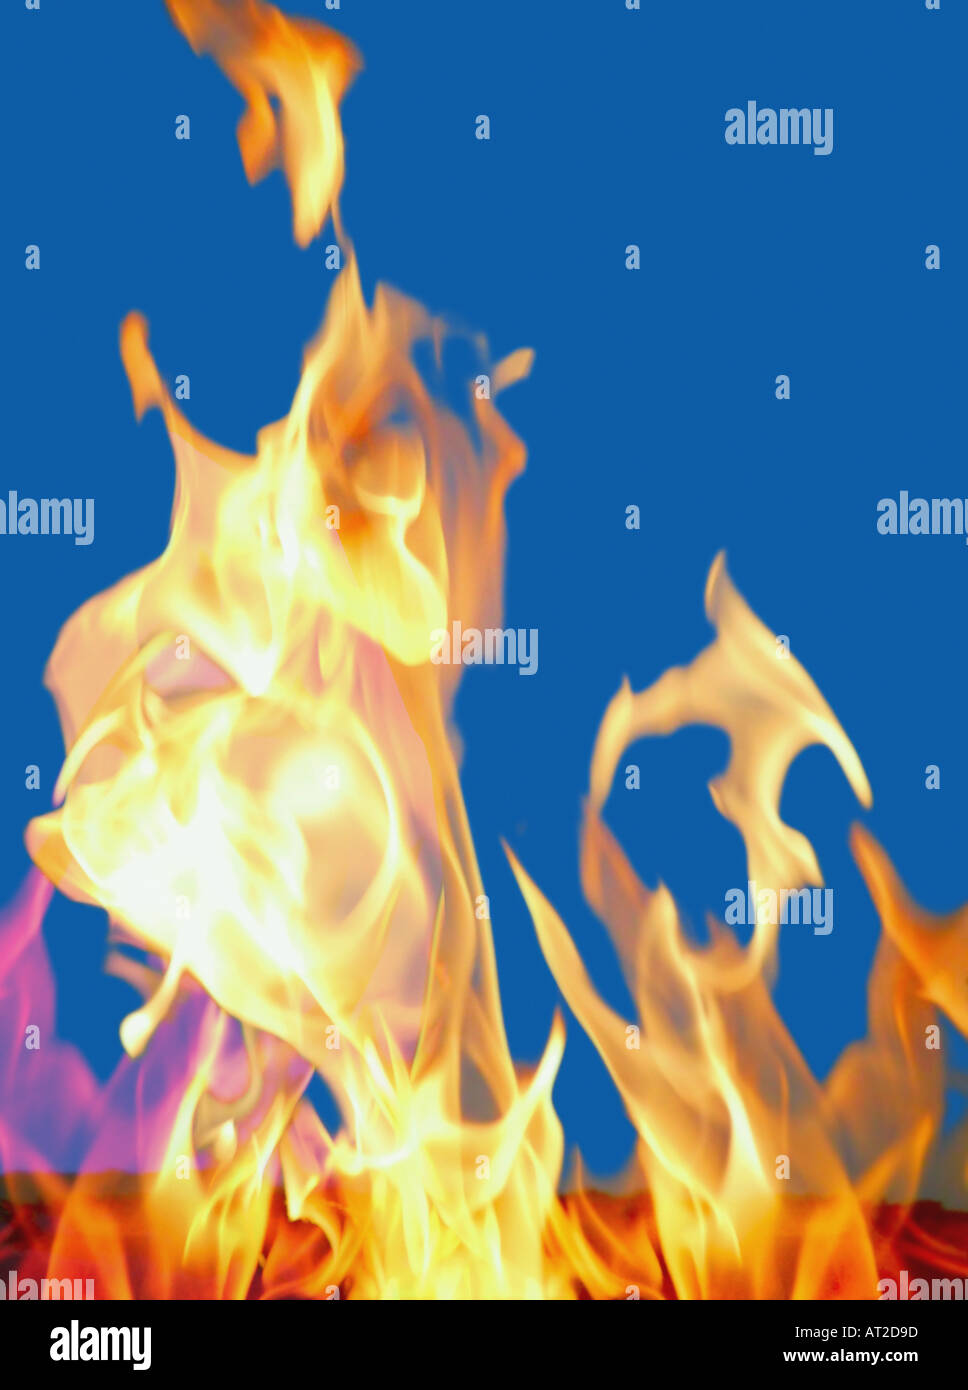 A fire Stock Photo